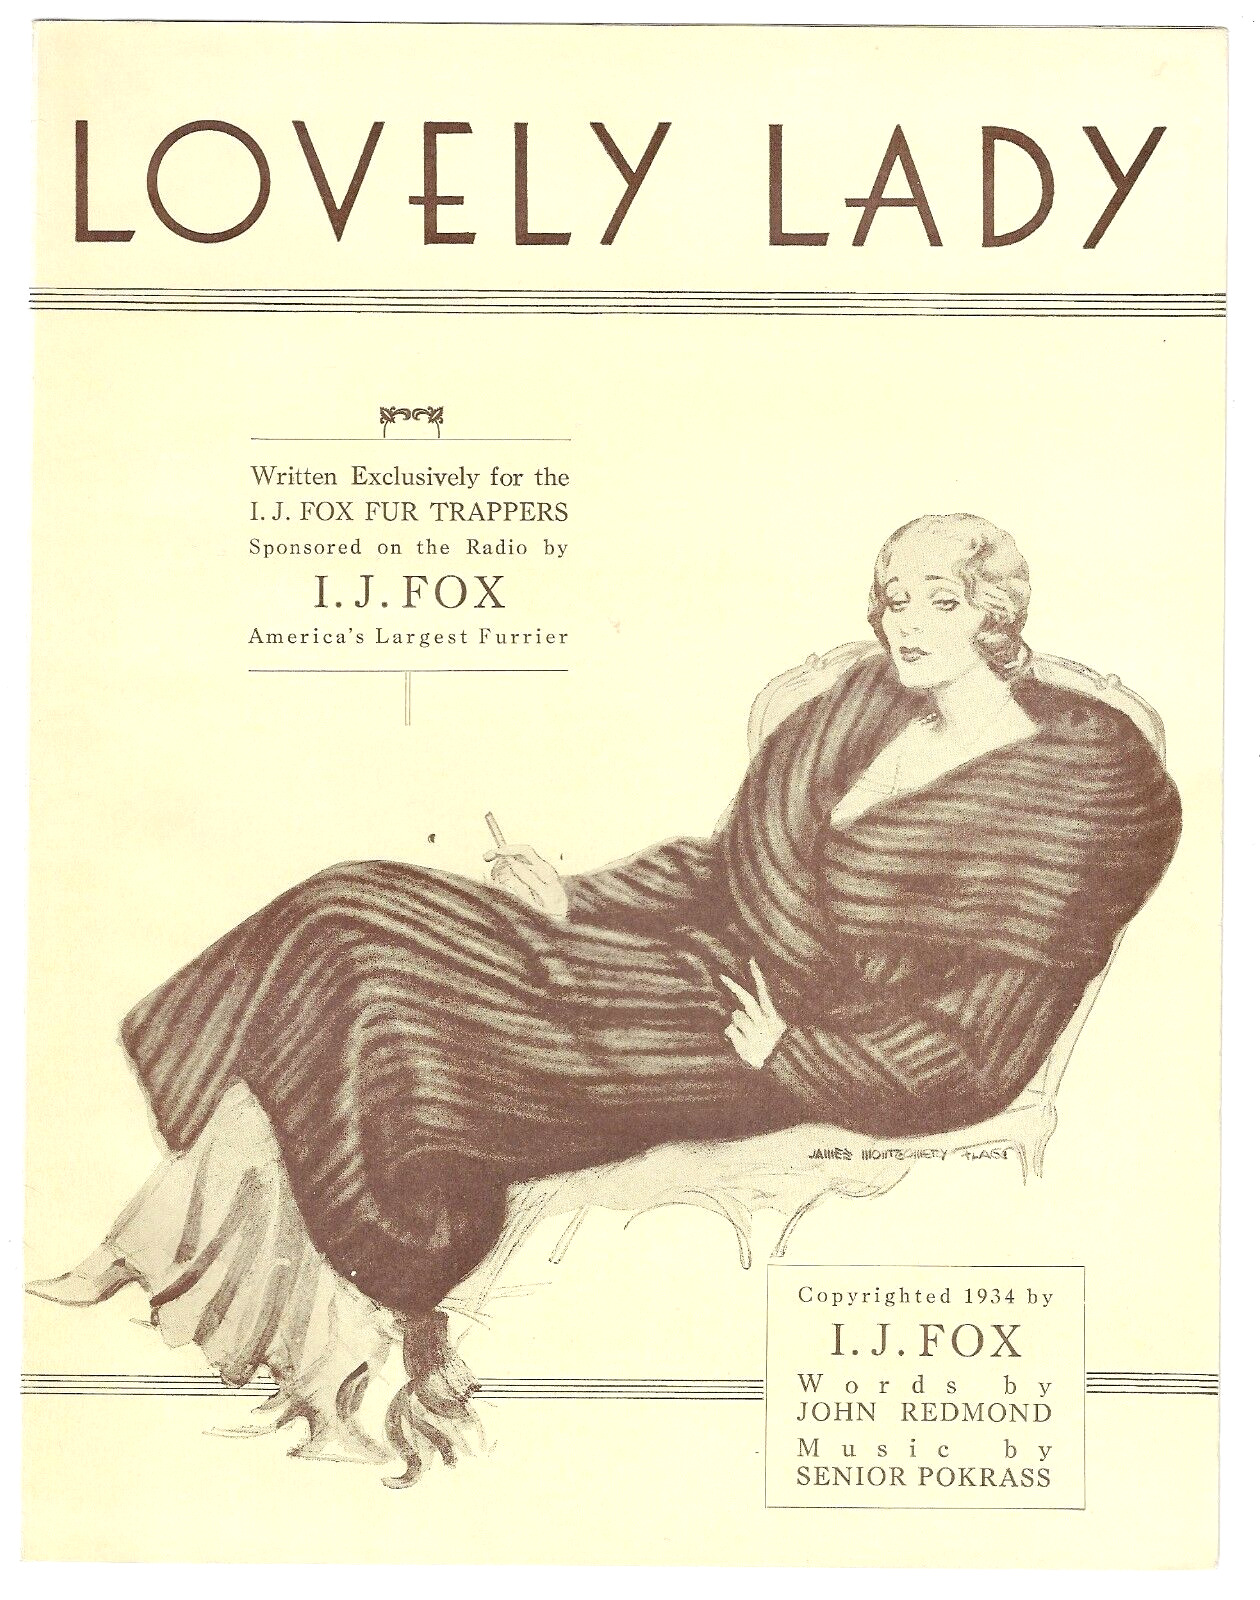 rare LOVELY LADY Sheet Music 1934  I.J. FOX FUR TRAPPERS MINK COAT Advertisement